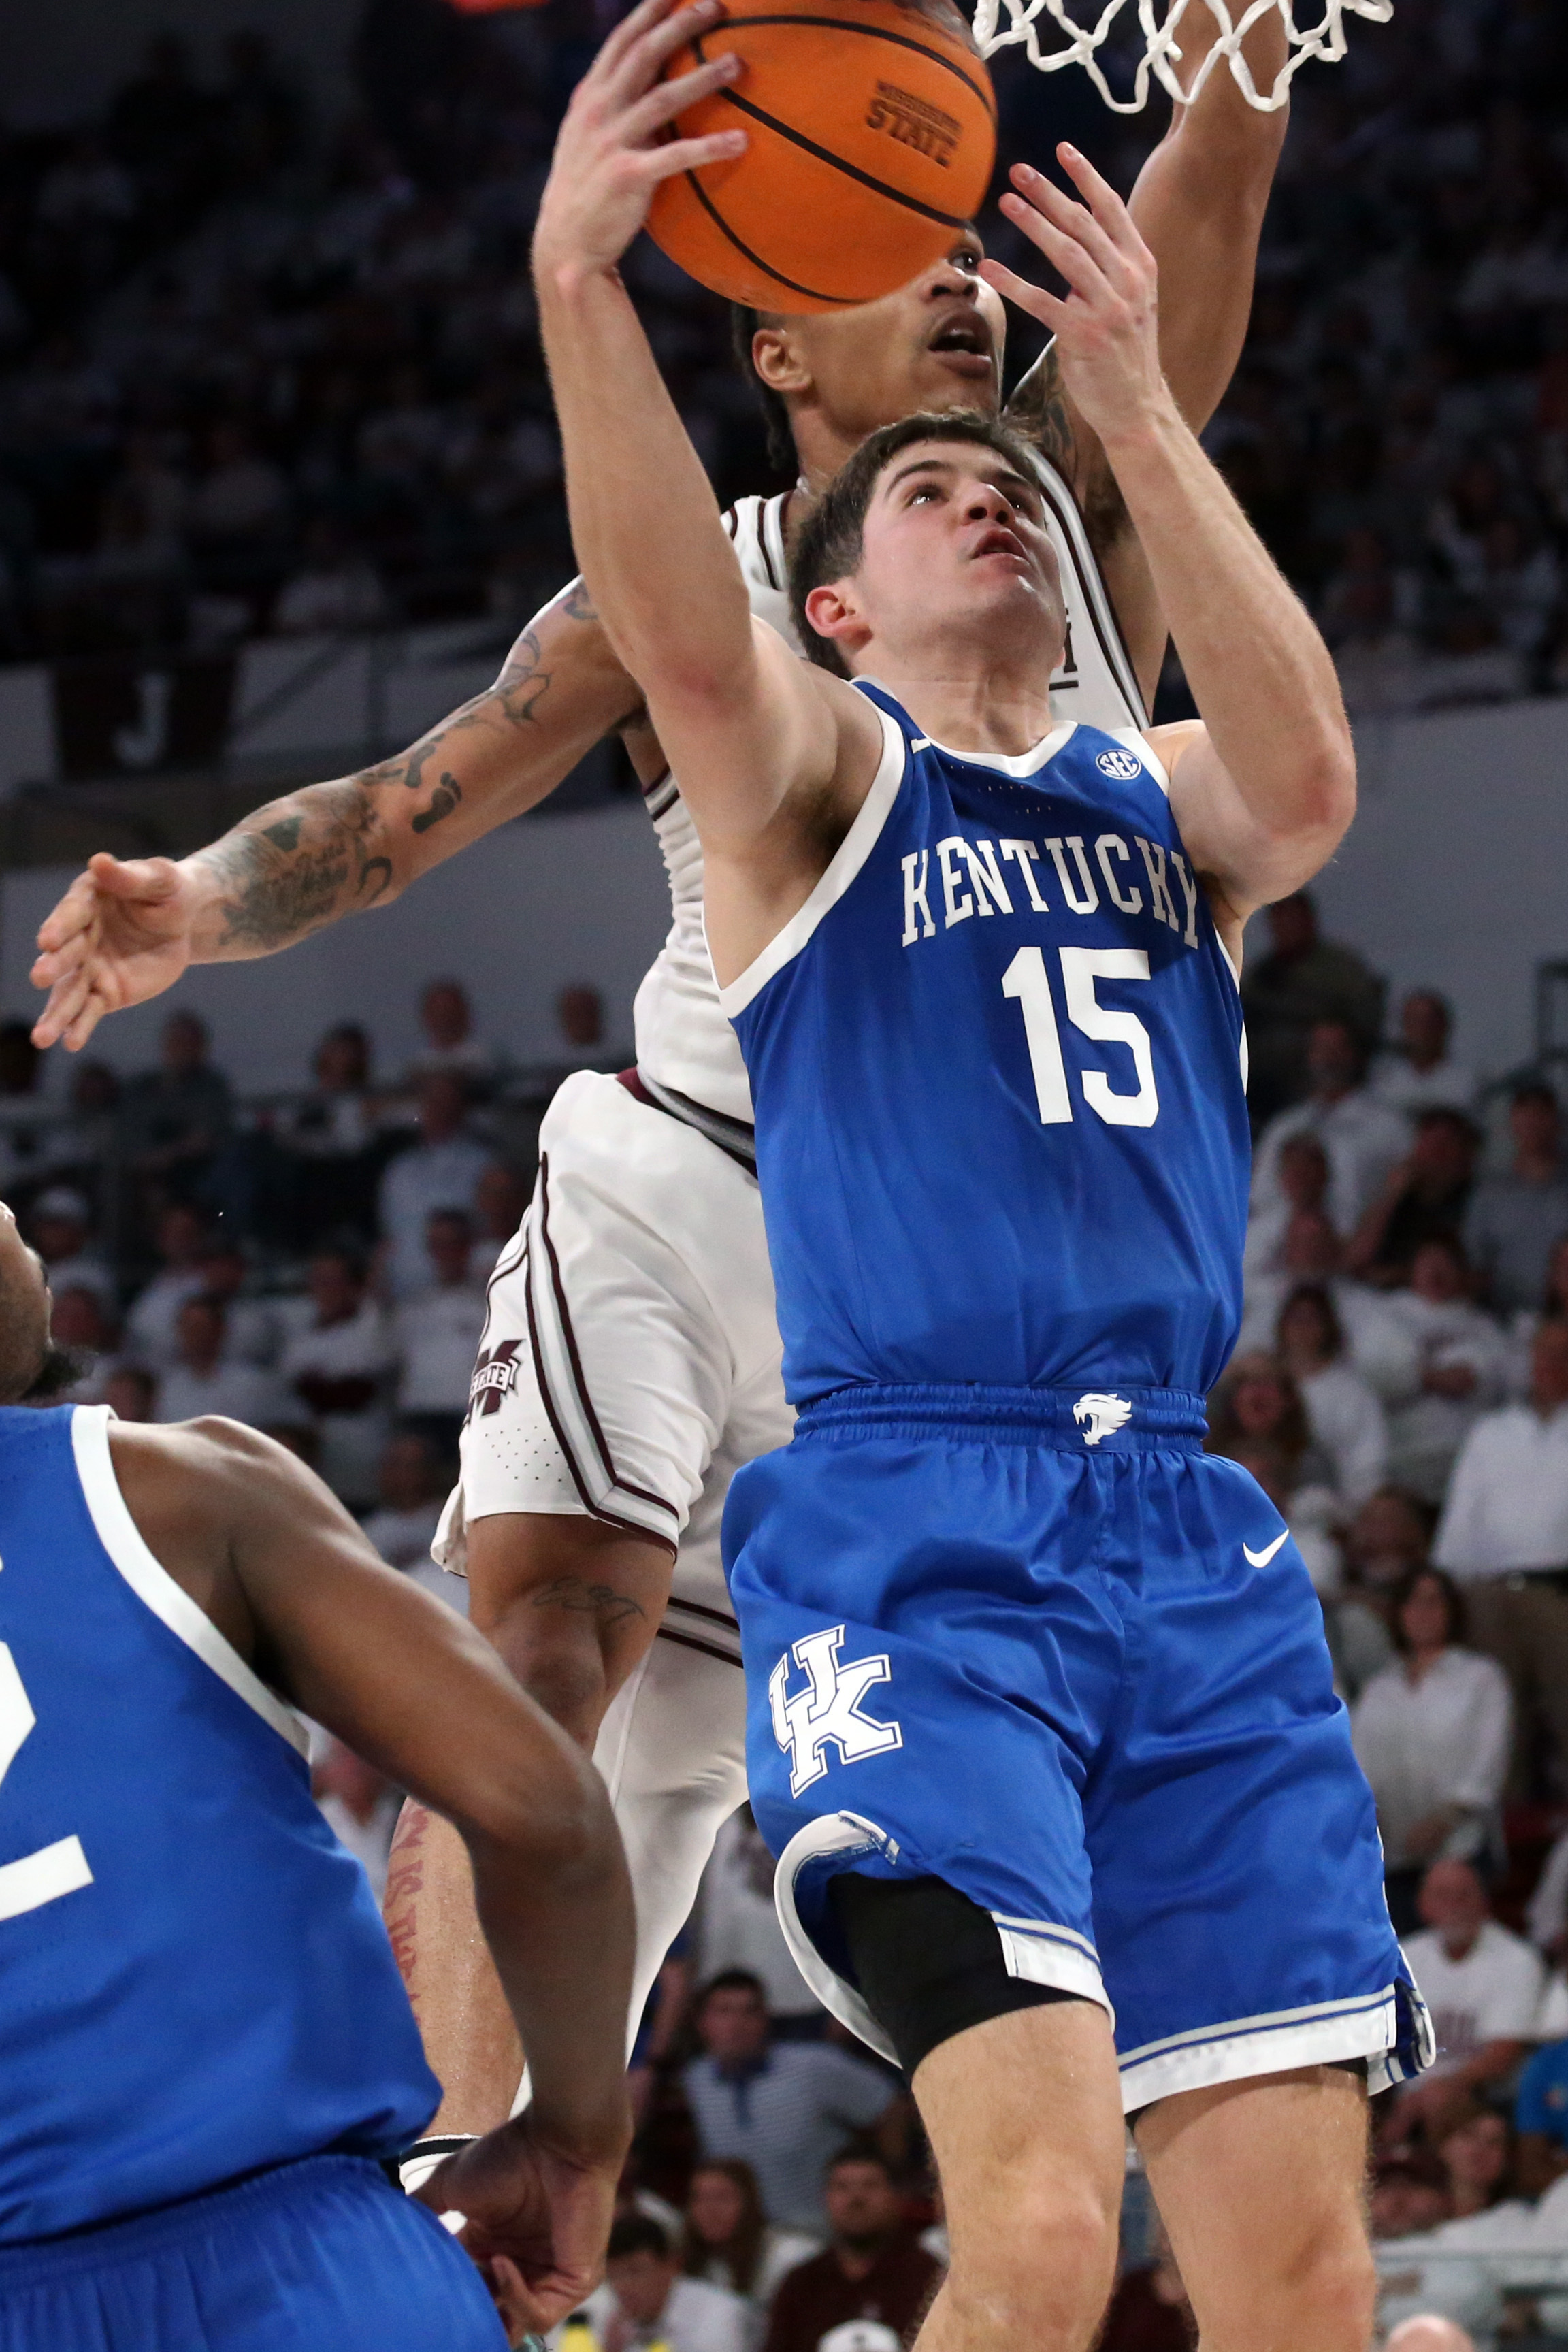 Reed Sheppard's heroics lift No. 16 Kentucky over Mississippi